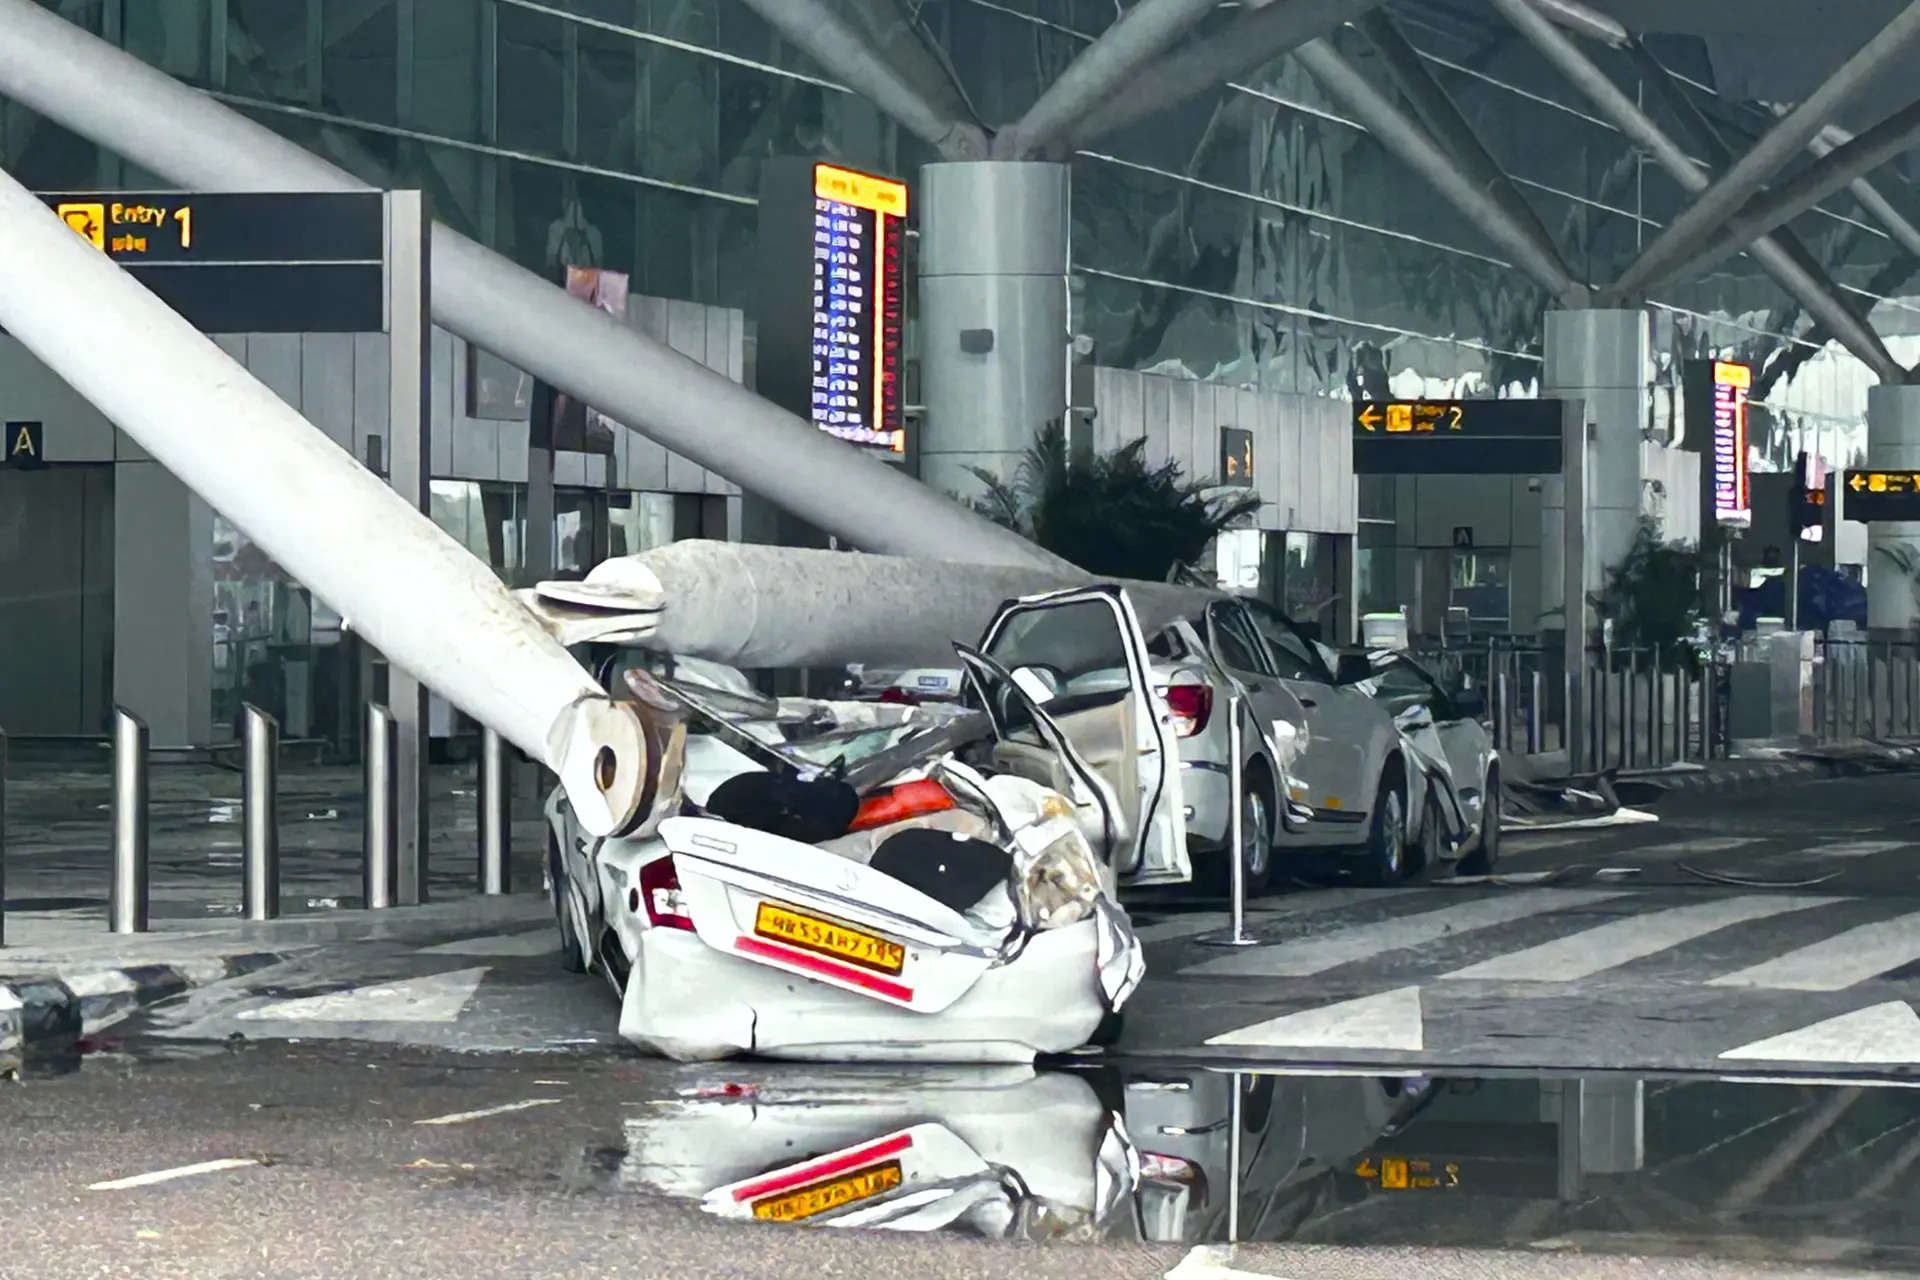 Delhi Airport T 1 Canopy Collapse: Terminal 1 operations suspended, passengers advised to check flight updates 